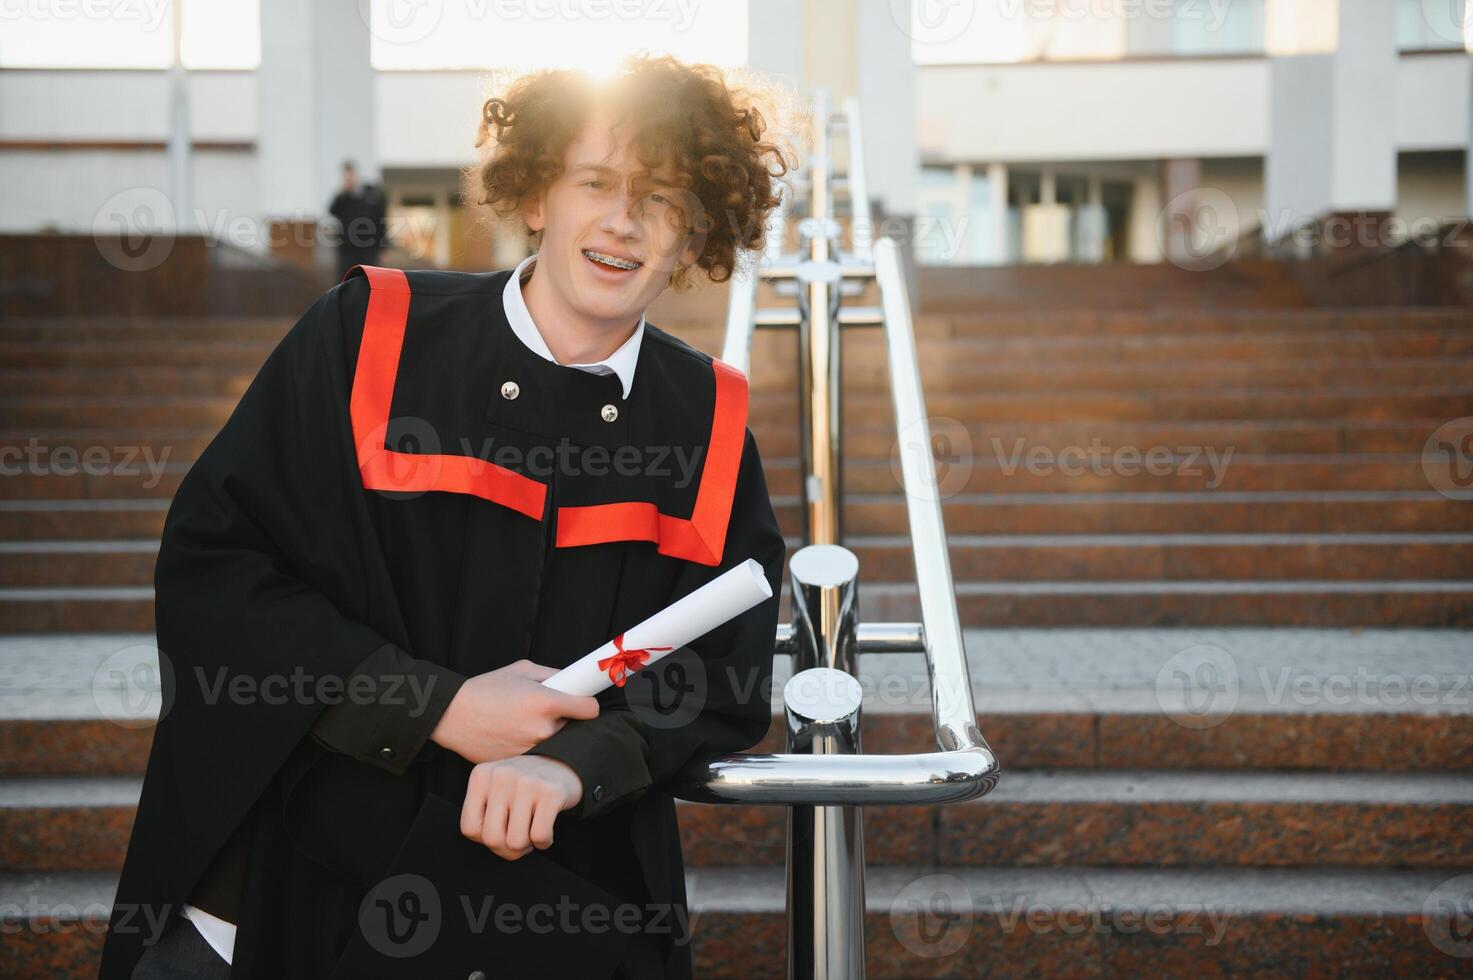 Graduation from university. Young smiling boy university graduate in traditional bonet and mantle standing and holding diploma in hand over university building background photo